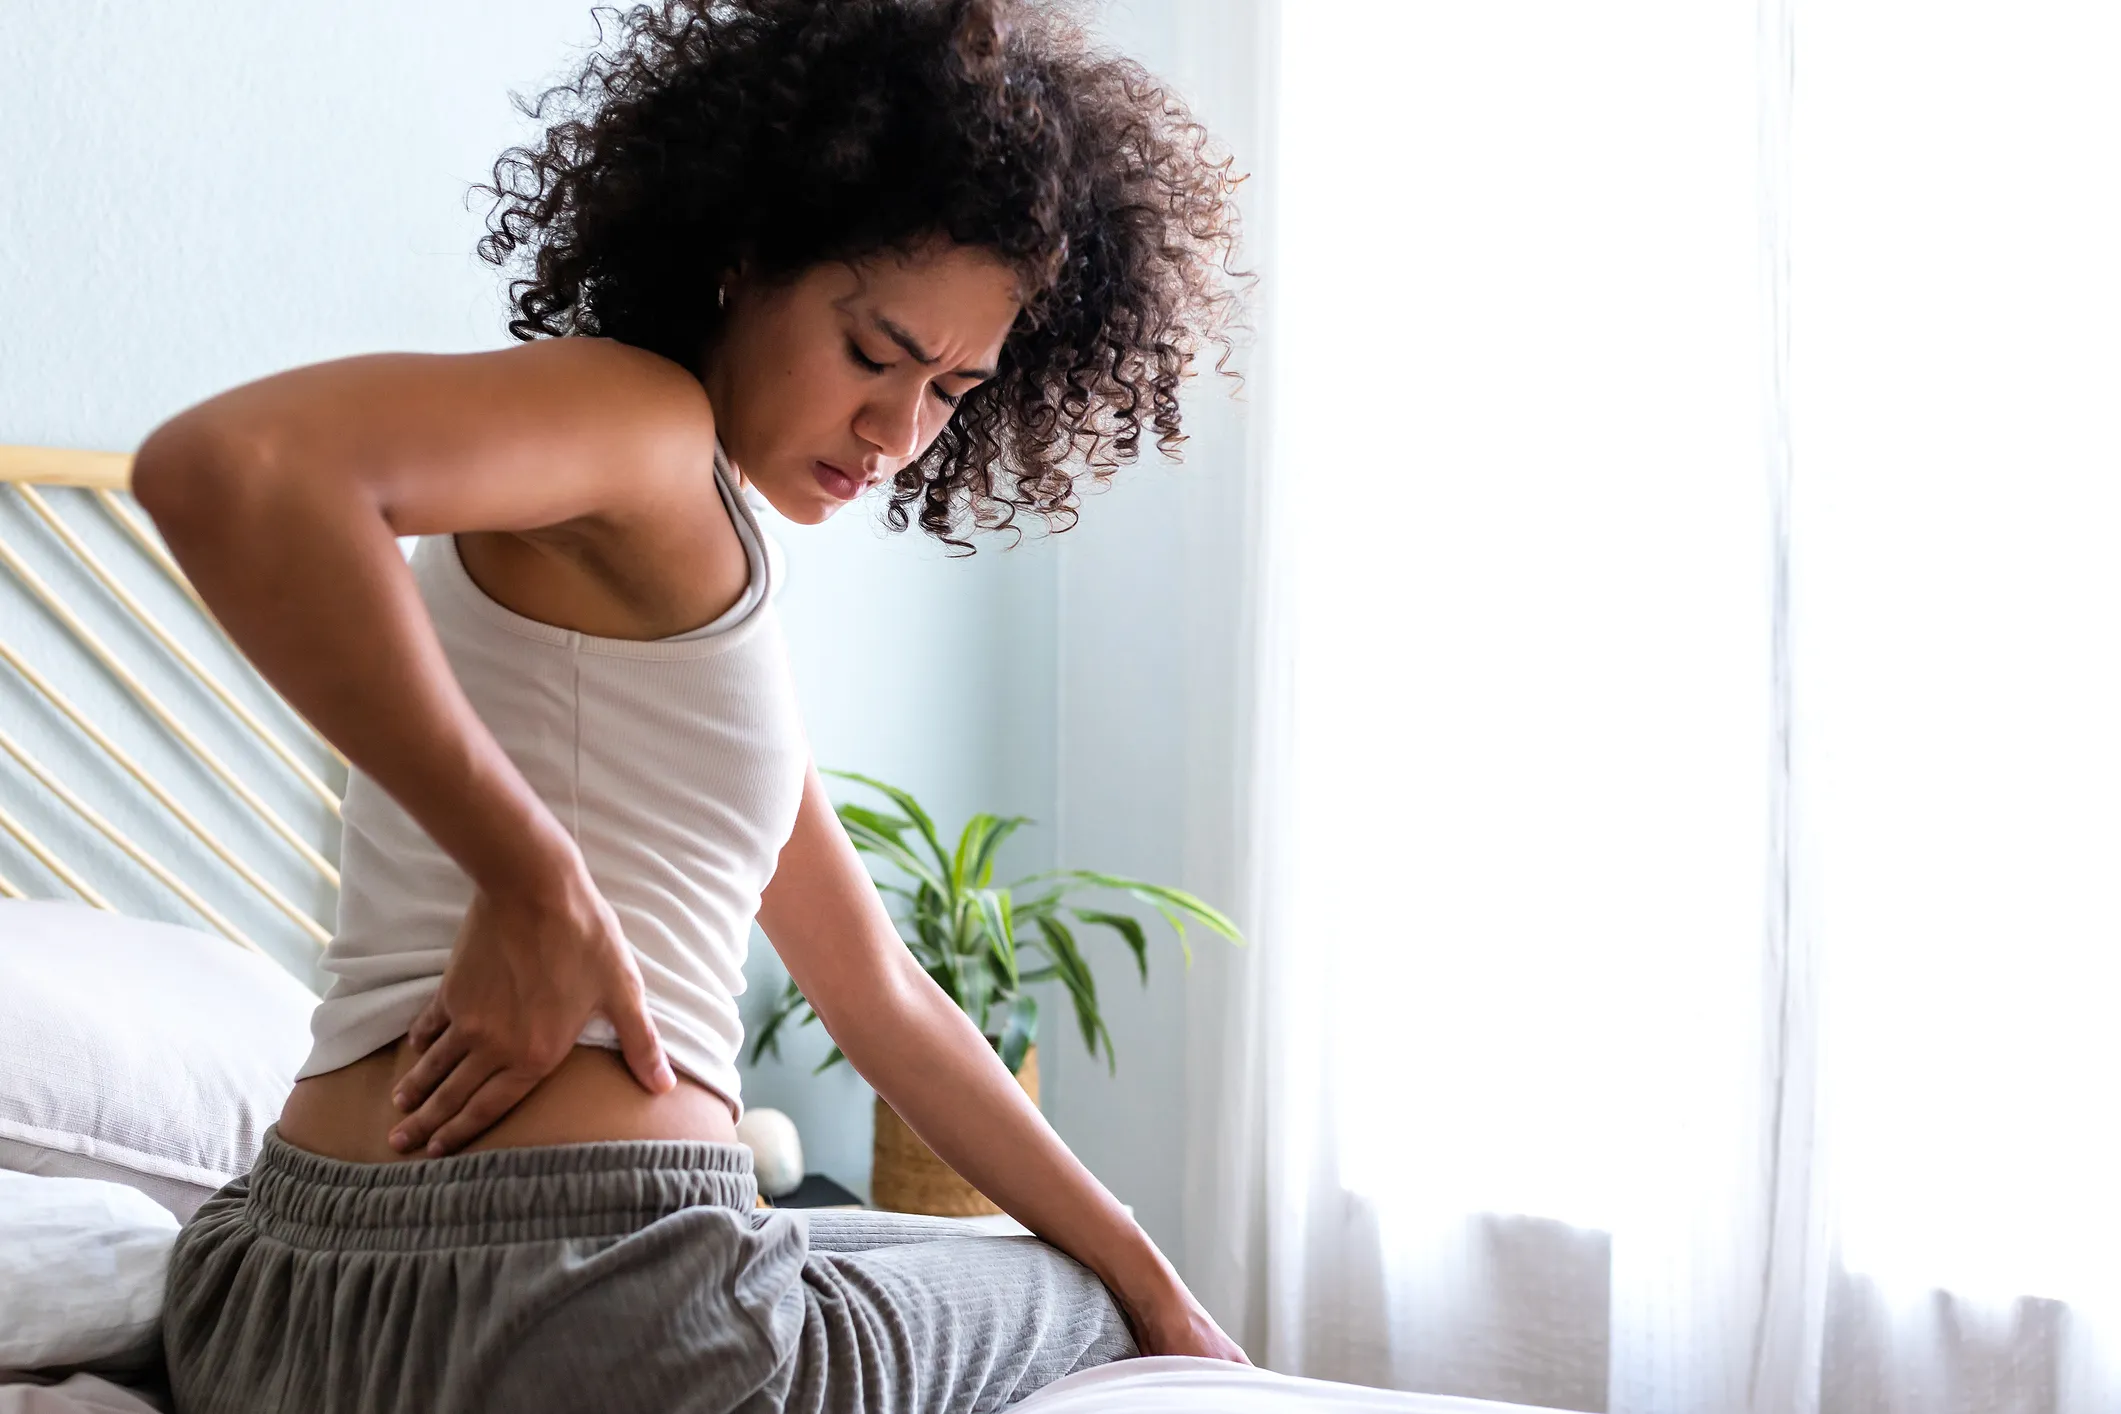 back pain in young adults